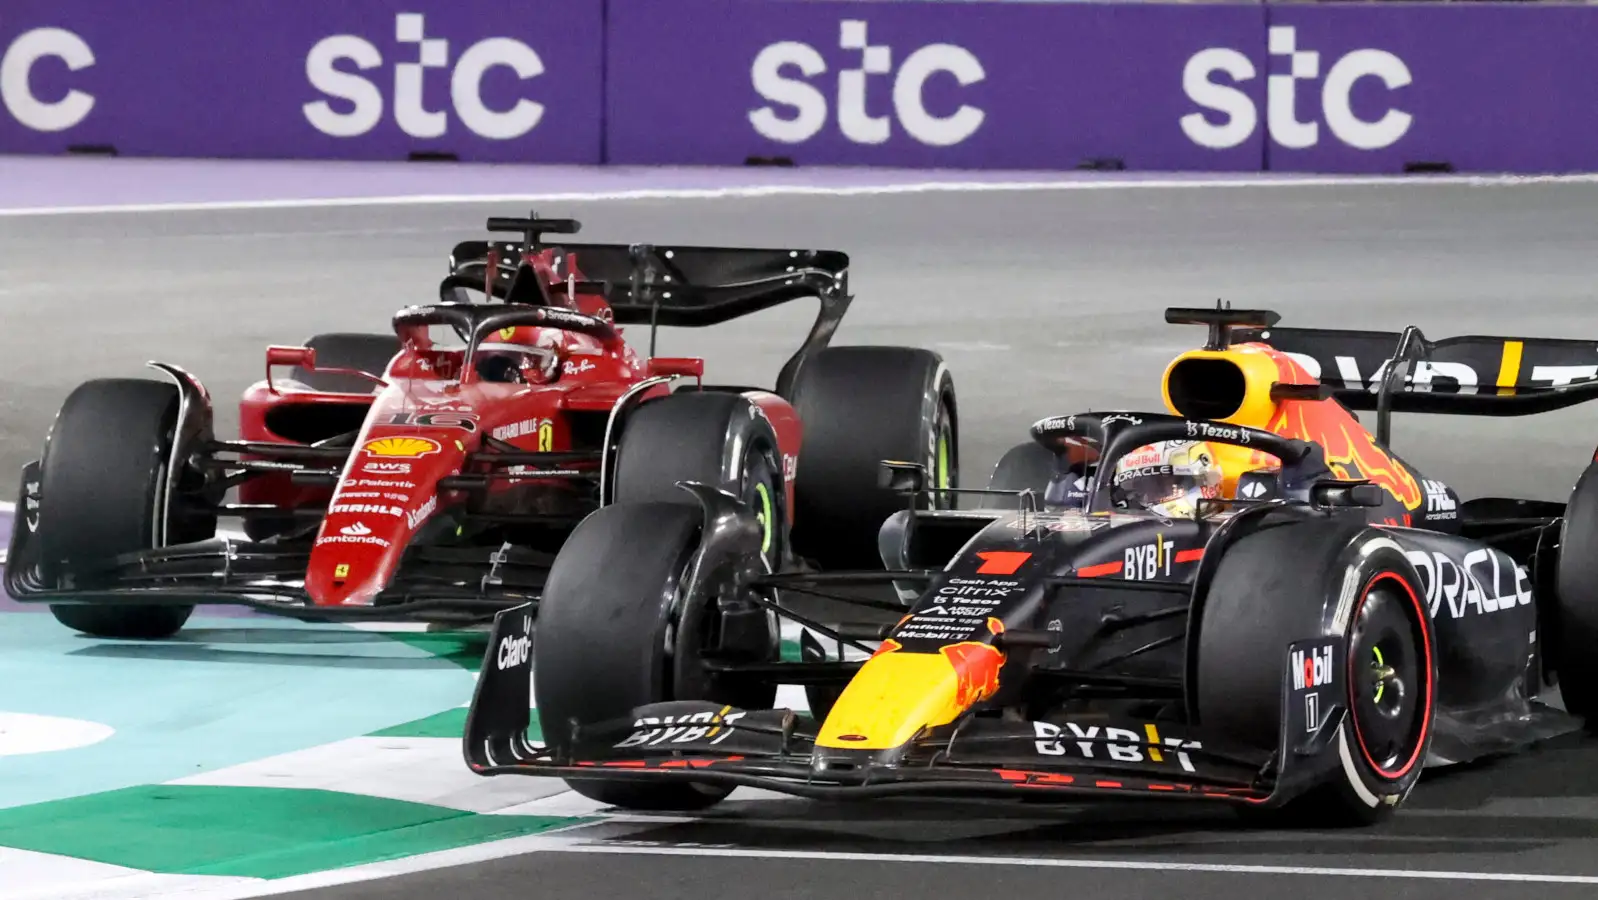 Max Verstappen and Charles Leclerc battle. Saudi Arabia March 2022